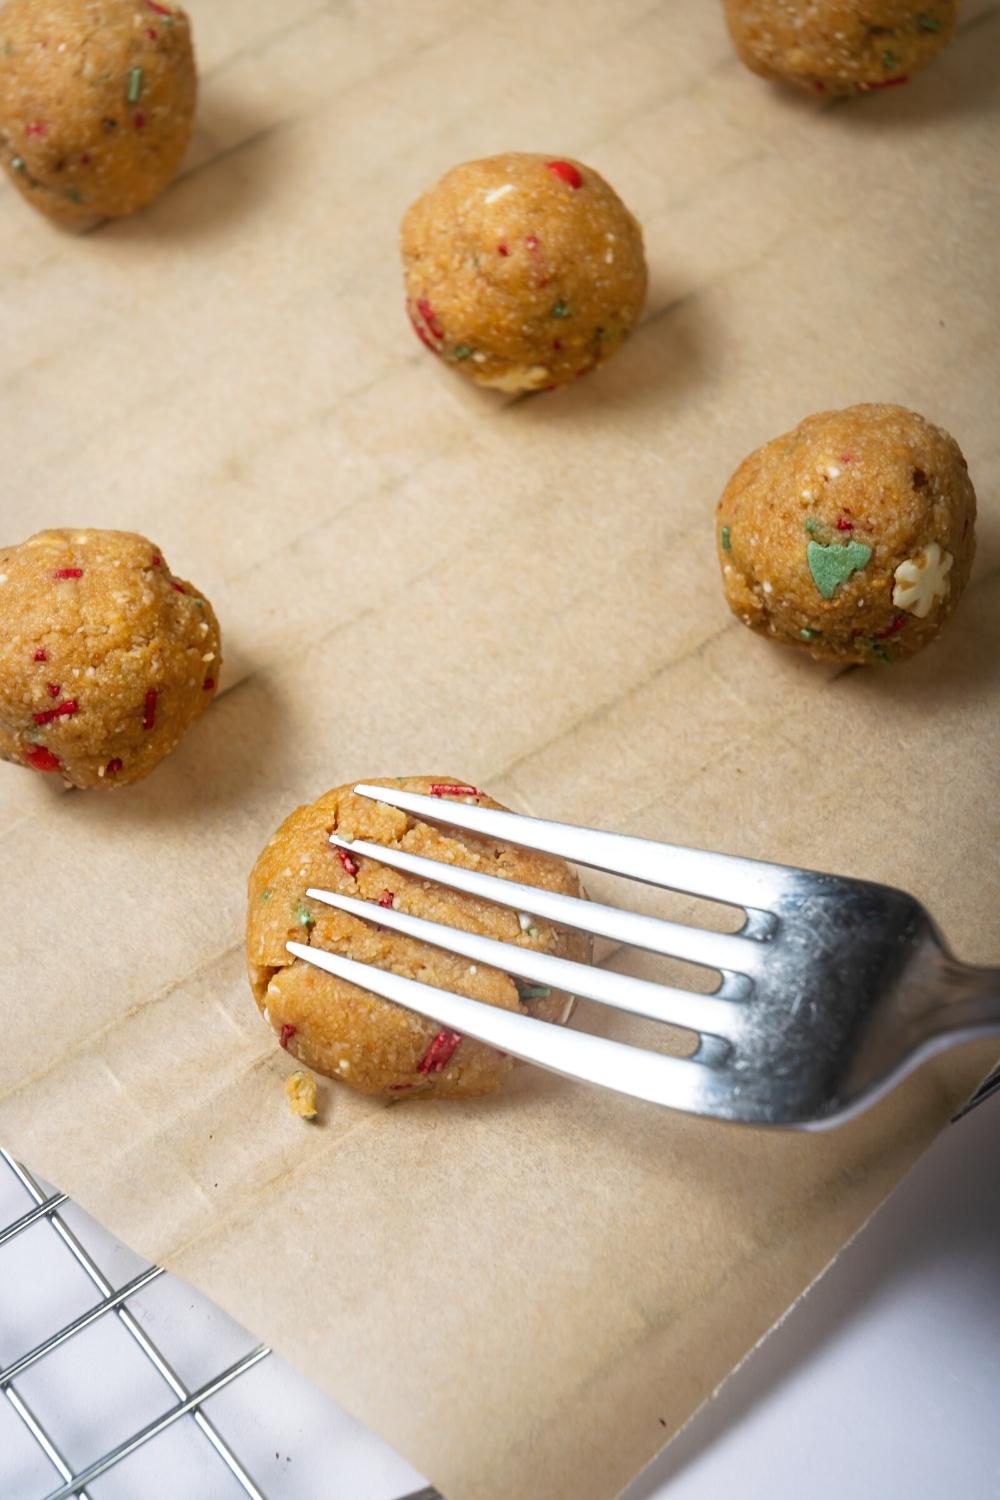 A fork pressing down on a no bake peanut butter ball on a piece of parchment paper. There are three peanut butter balls behind it.